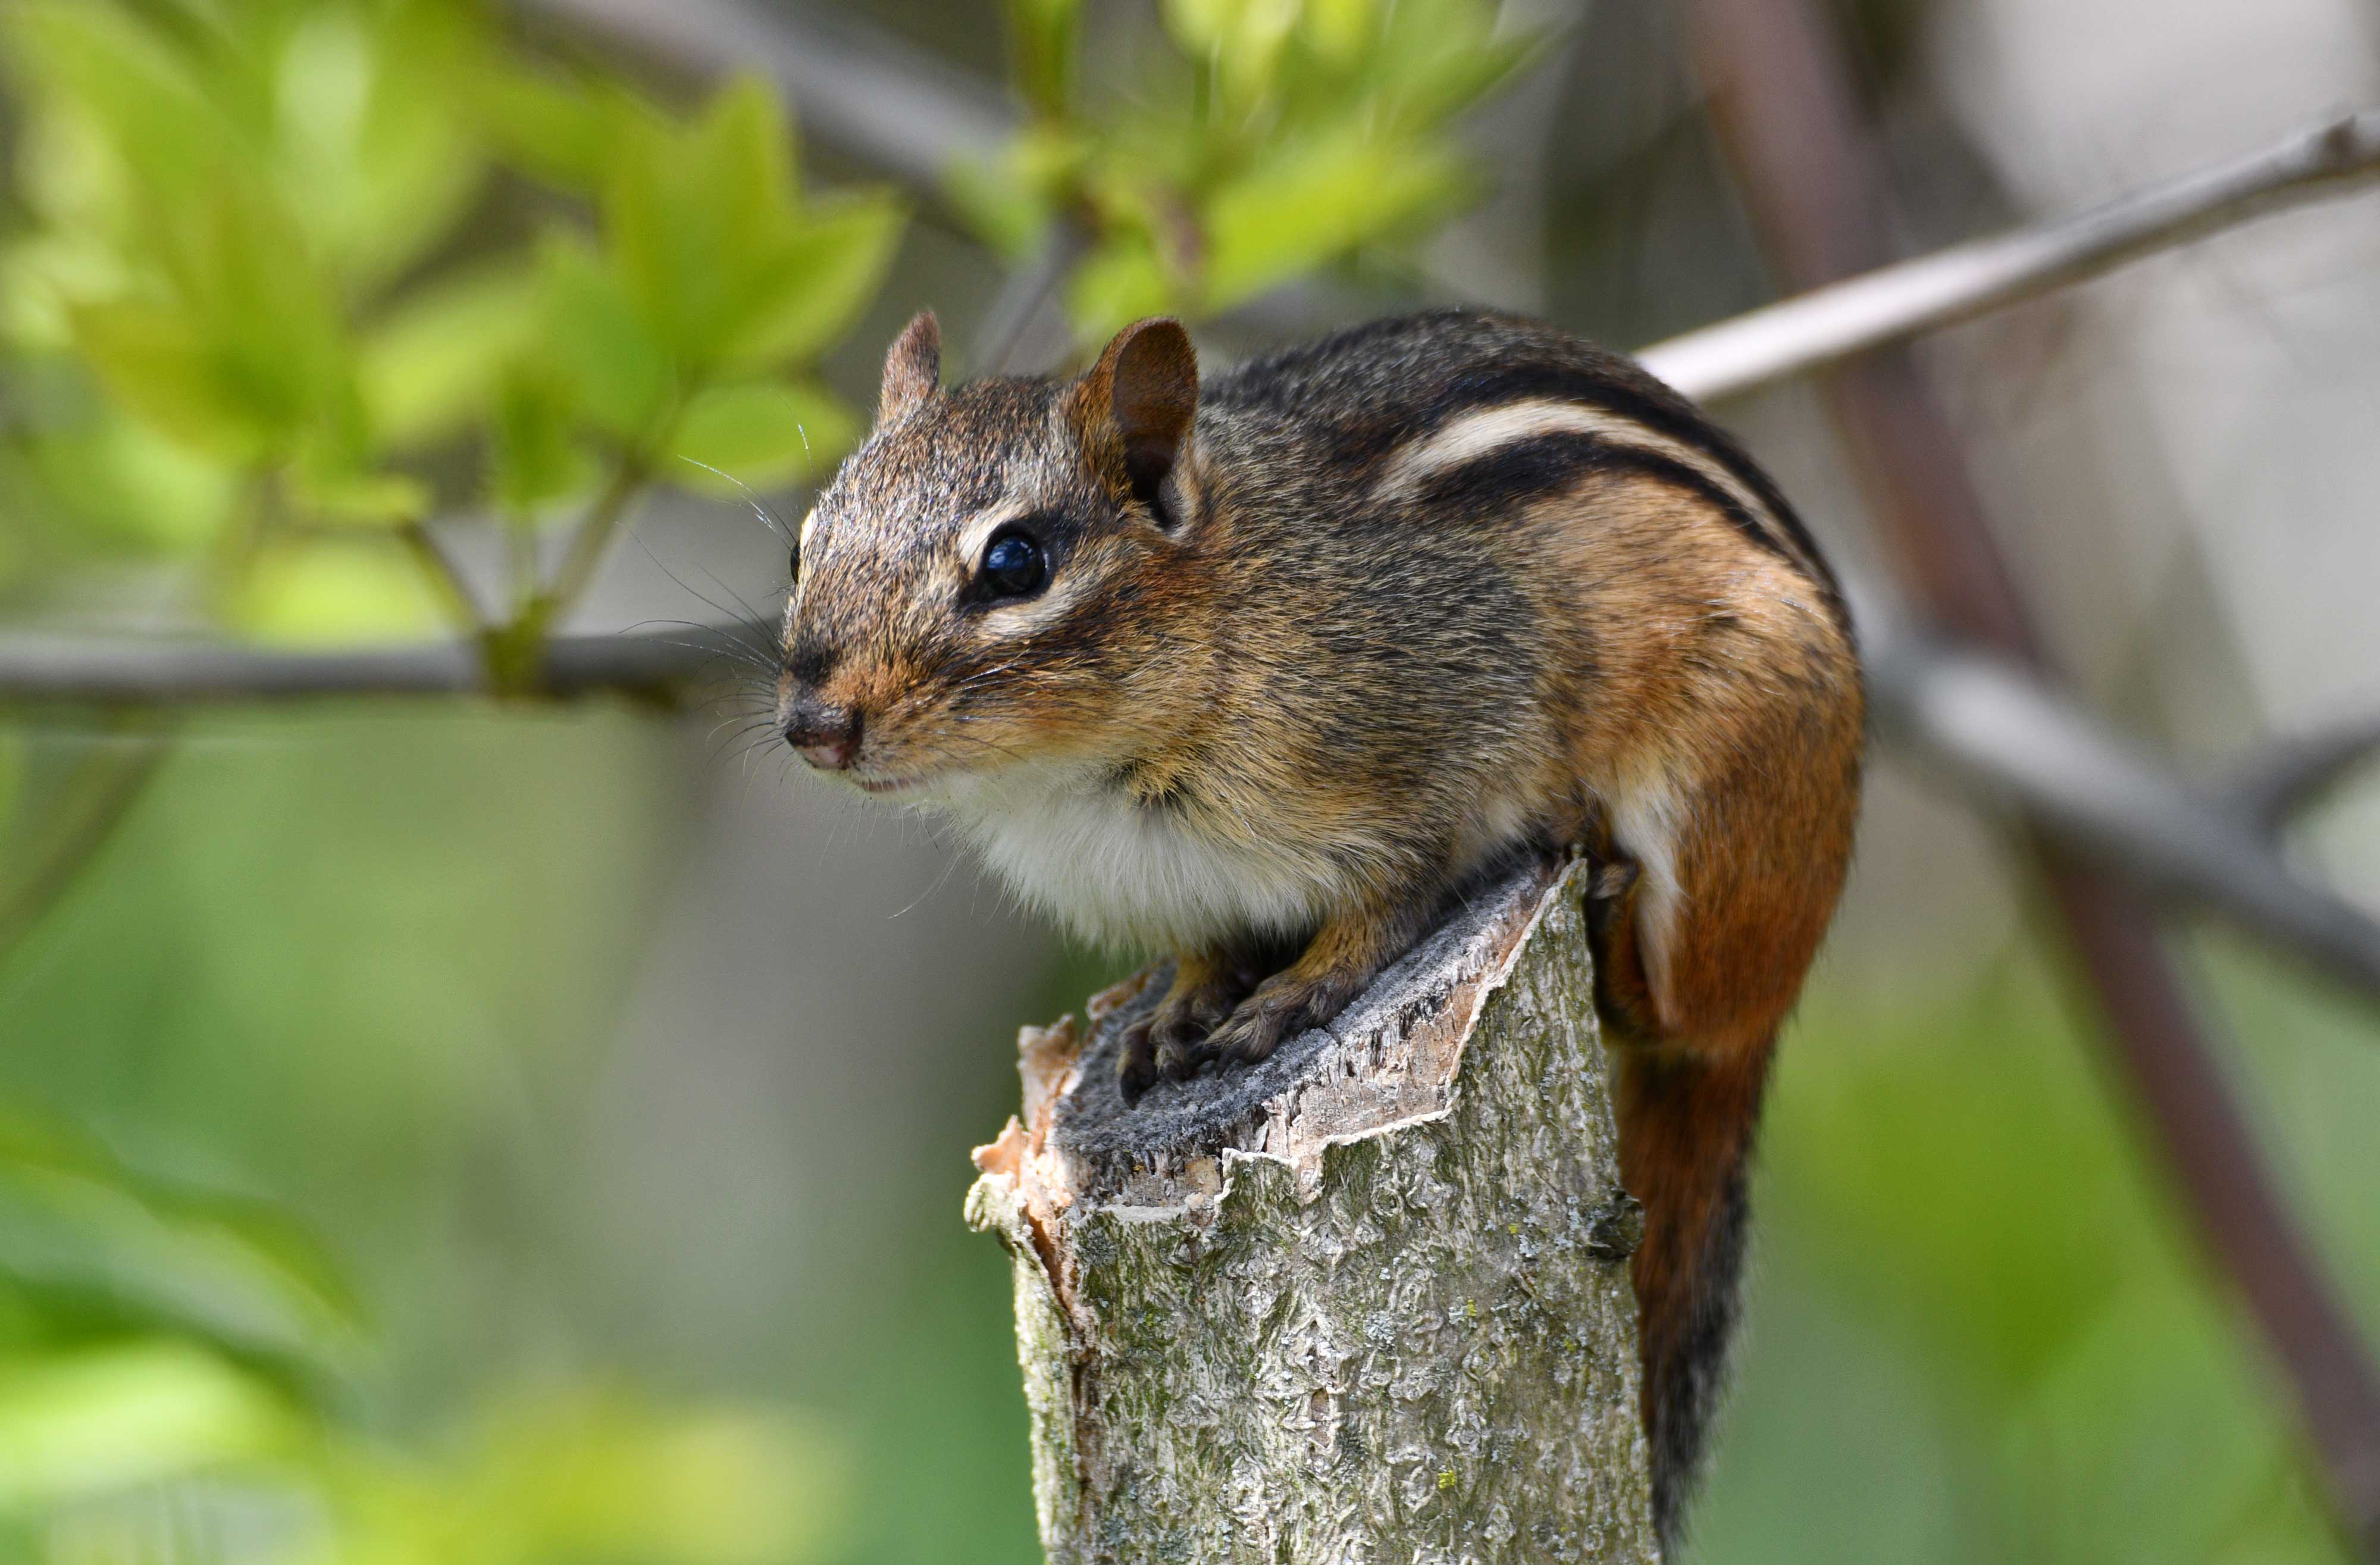 A chipmunk on a wooden post.